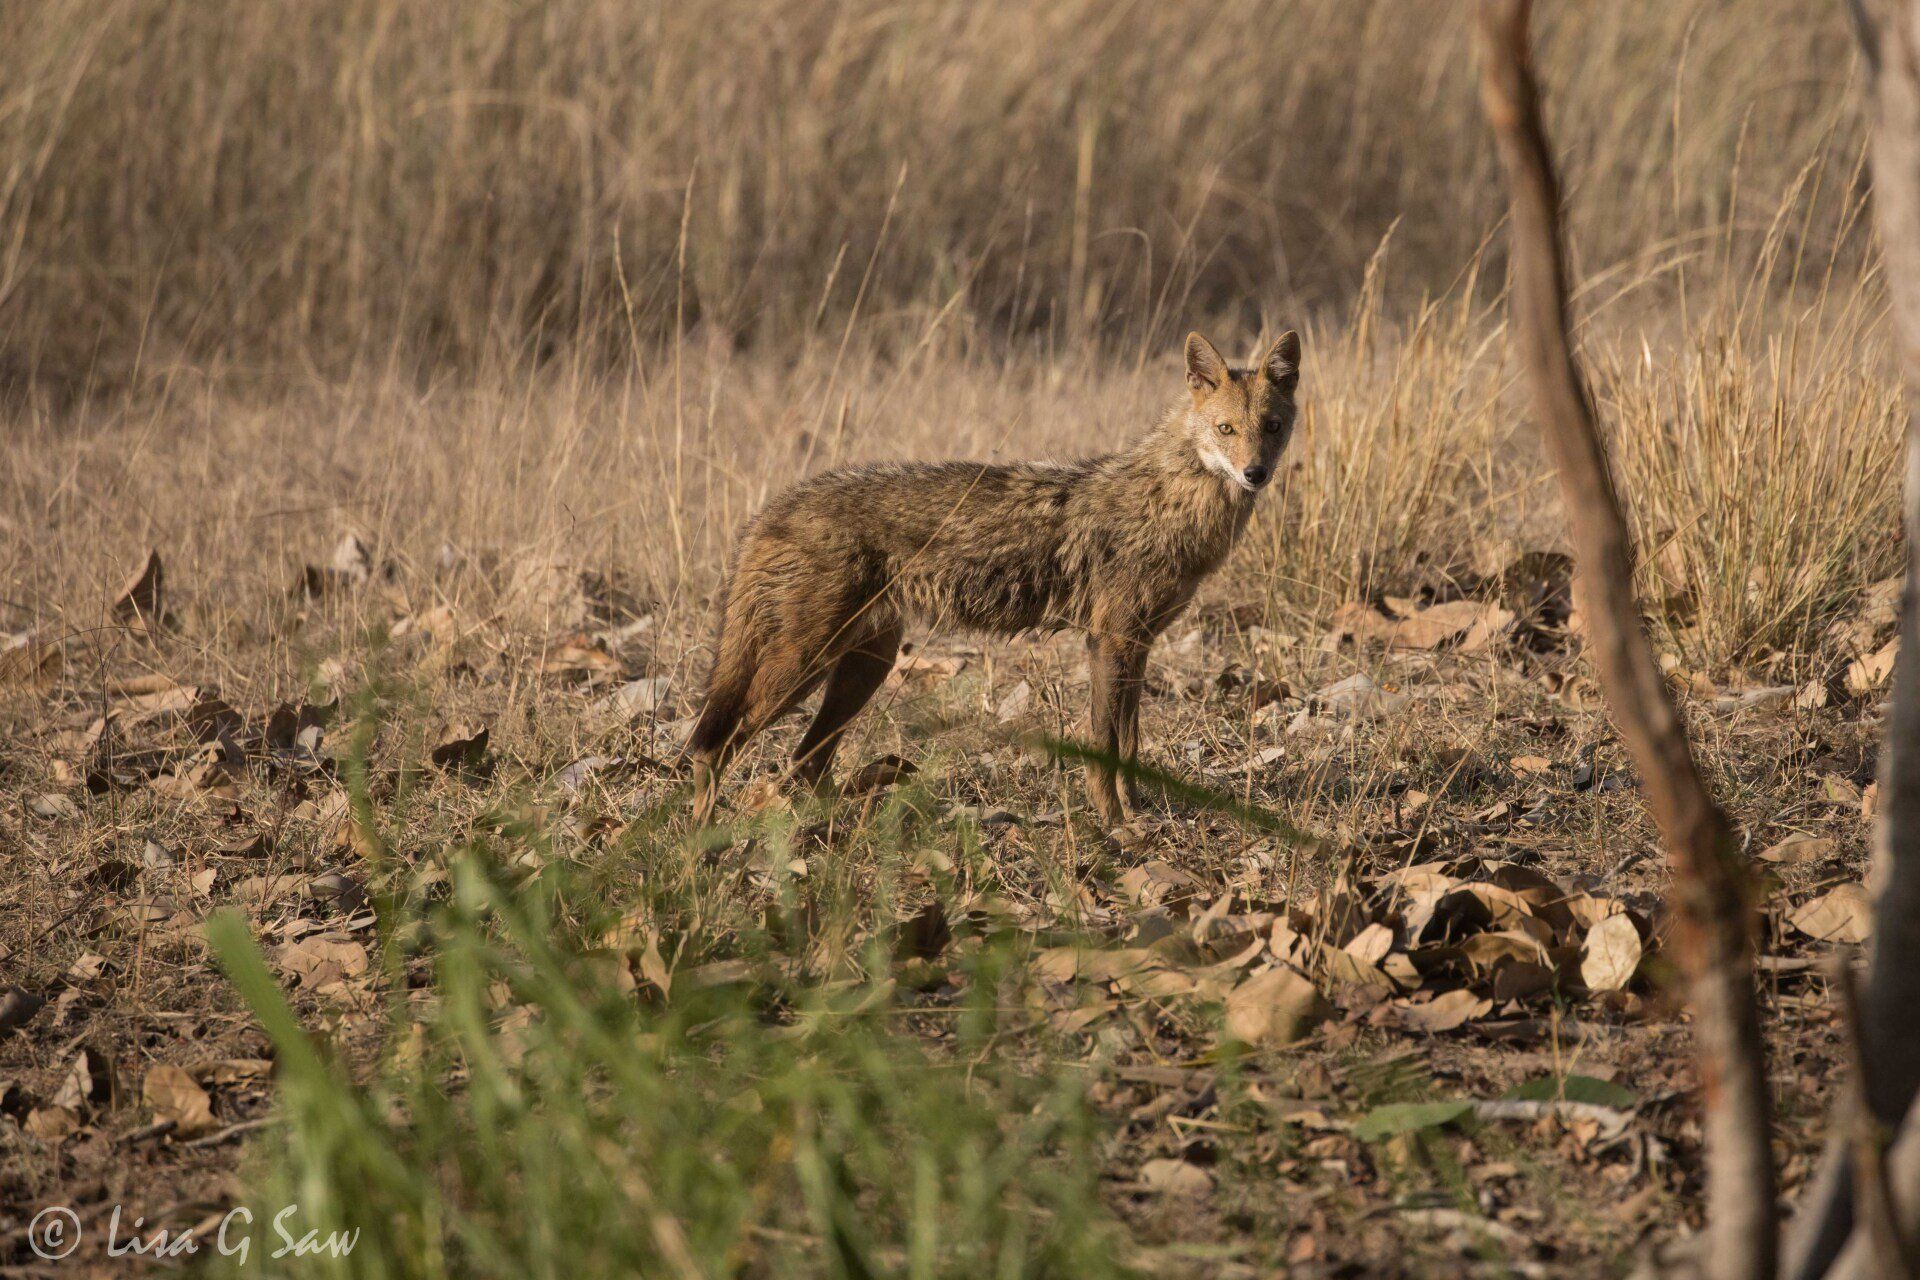 Indian Jackal side on looking at camera